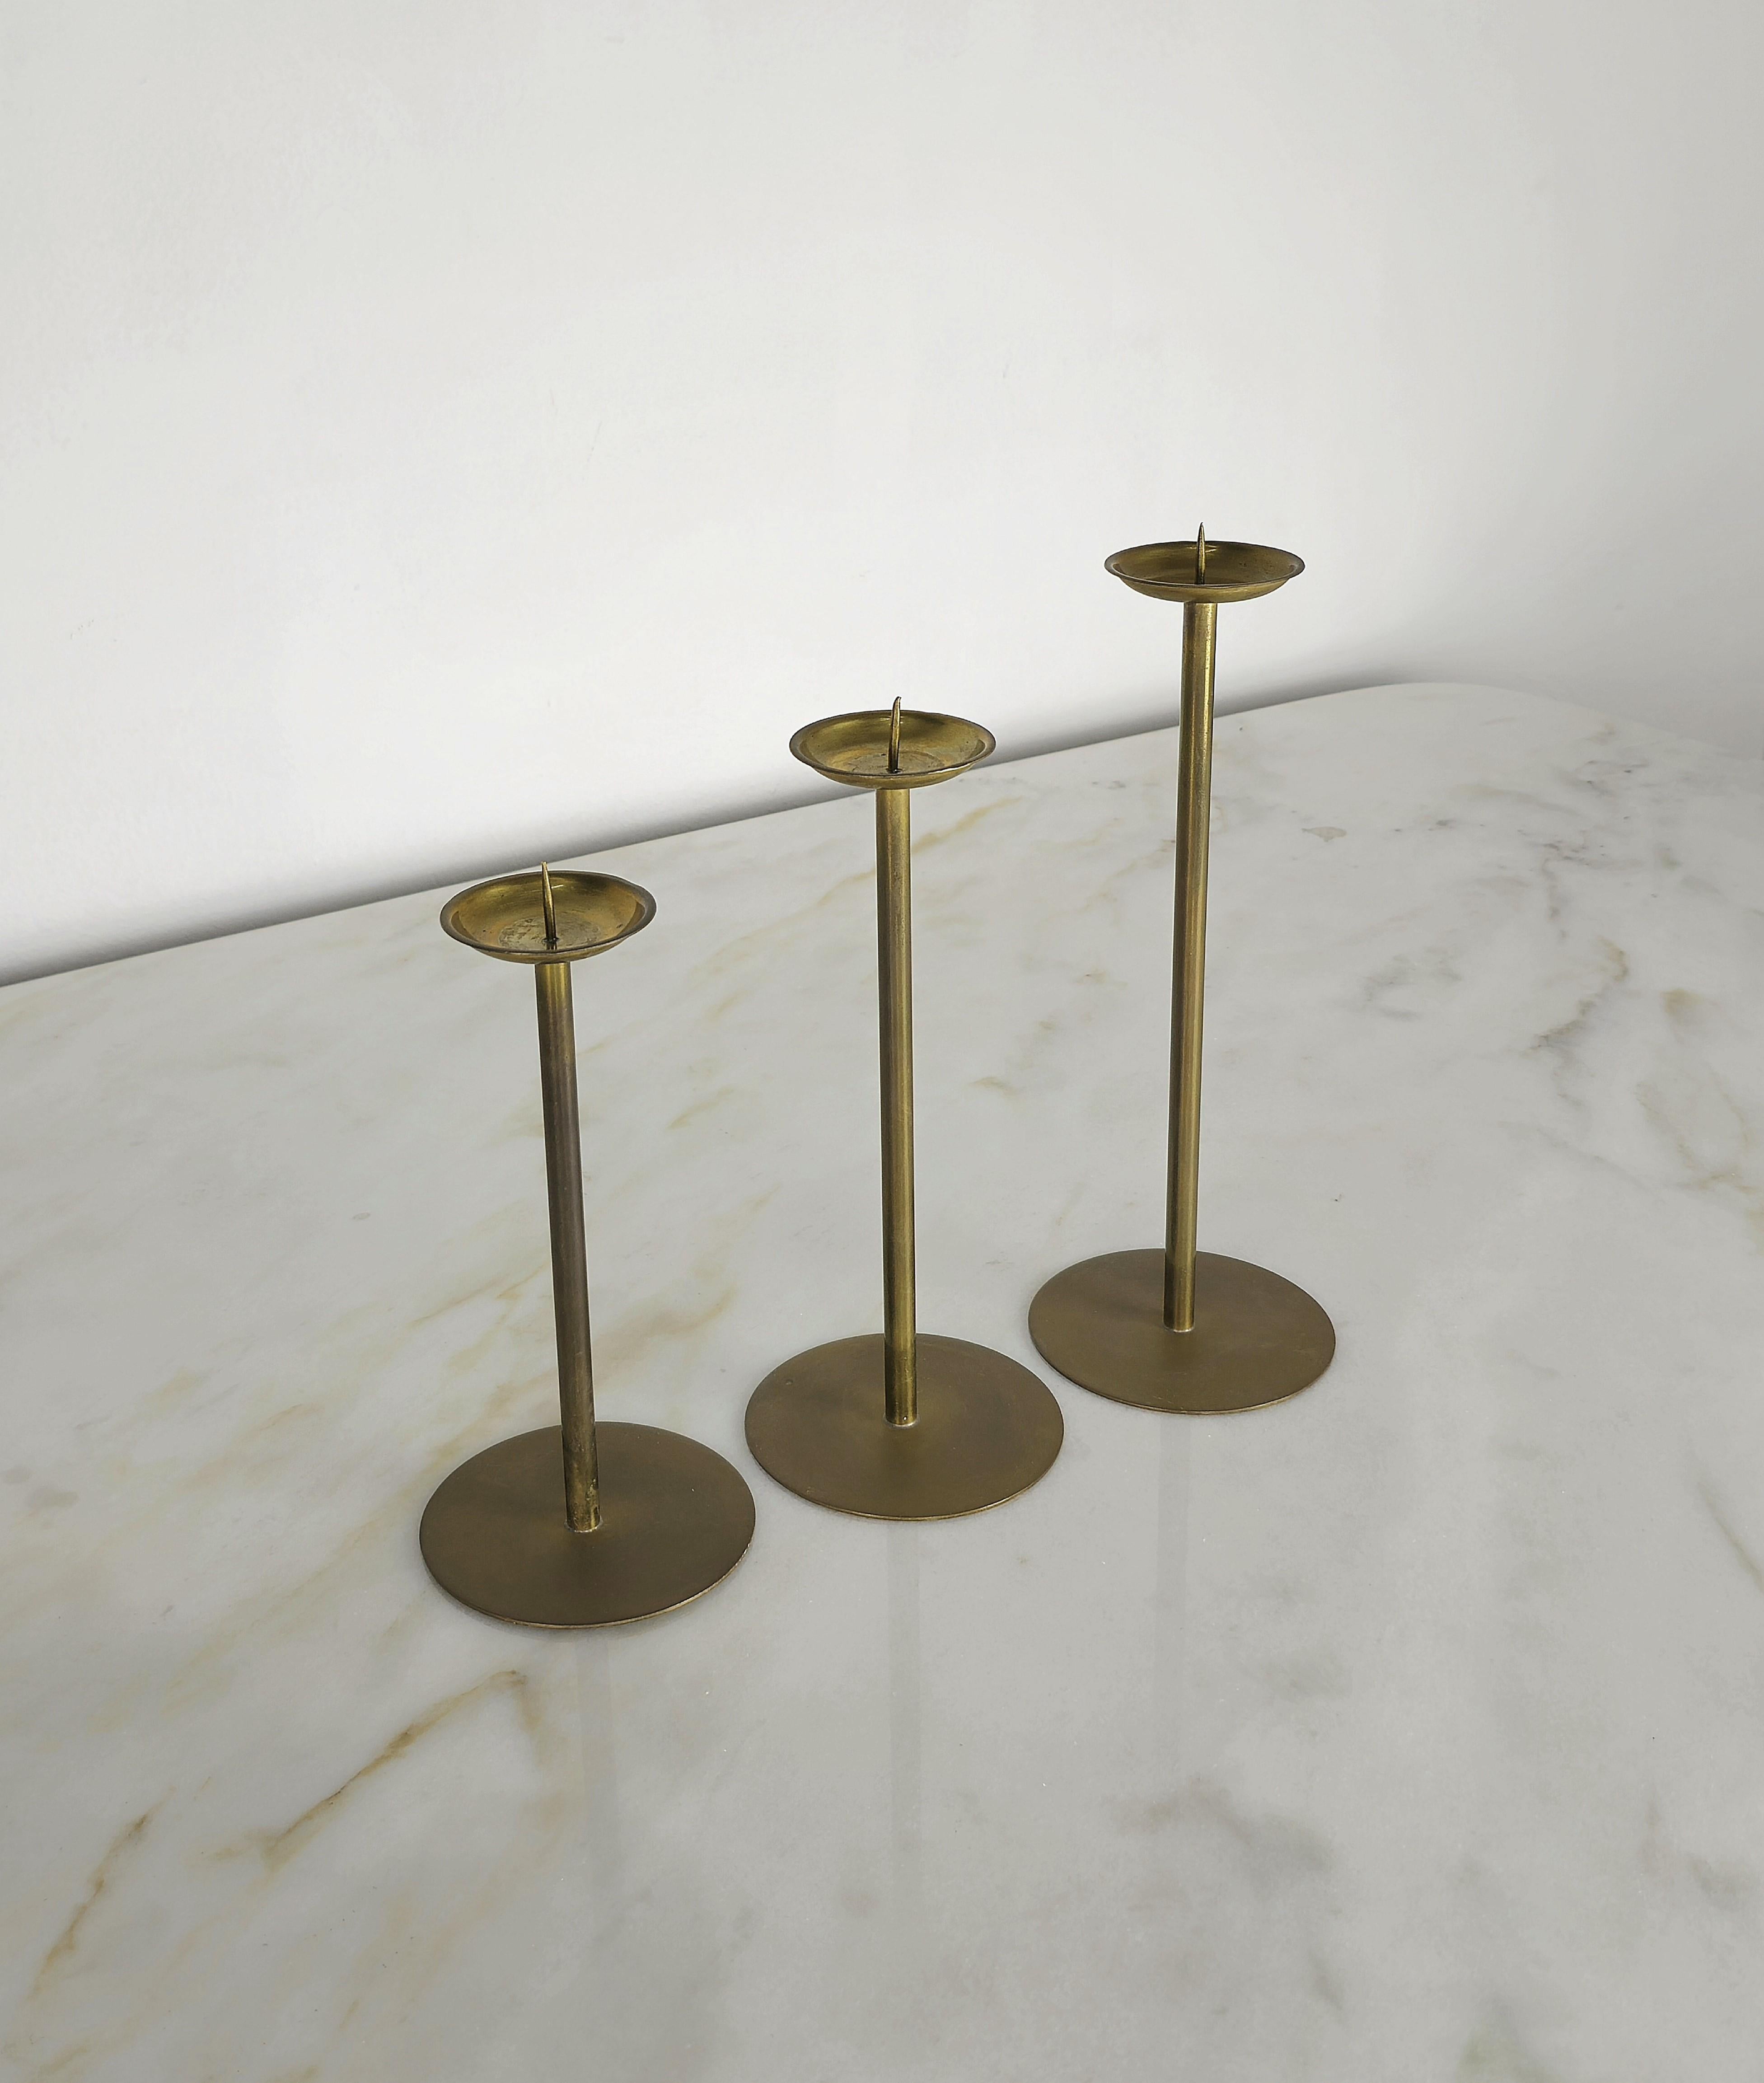 Candle Holders Candlesticks Decorative Objects Brass Midcentury 1960s Set of 3 For Sale 2